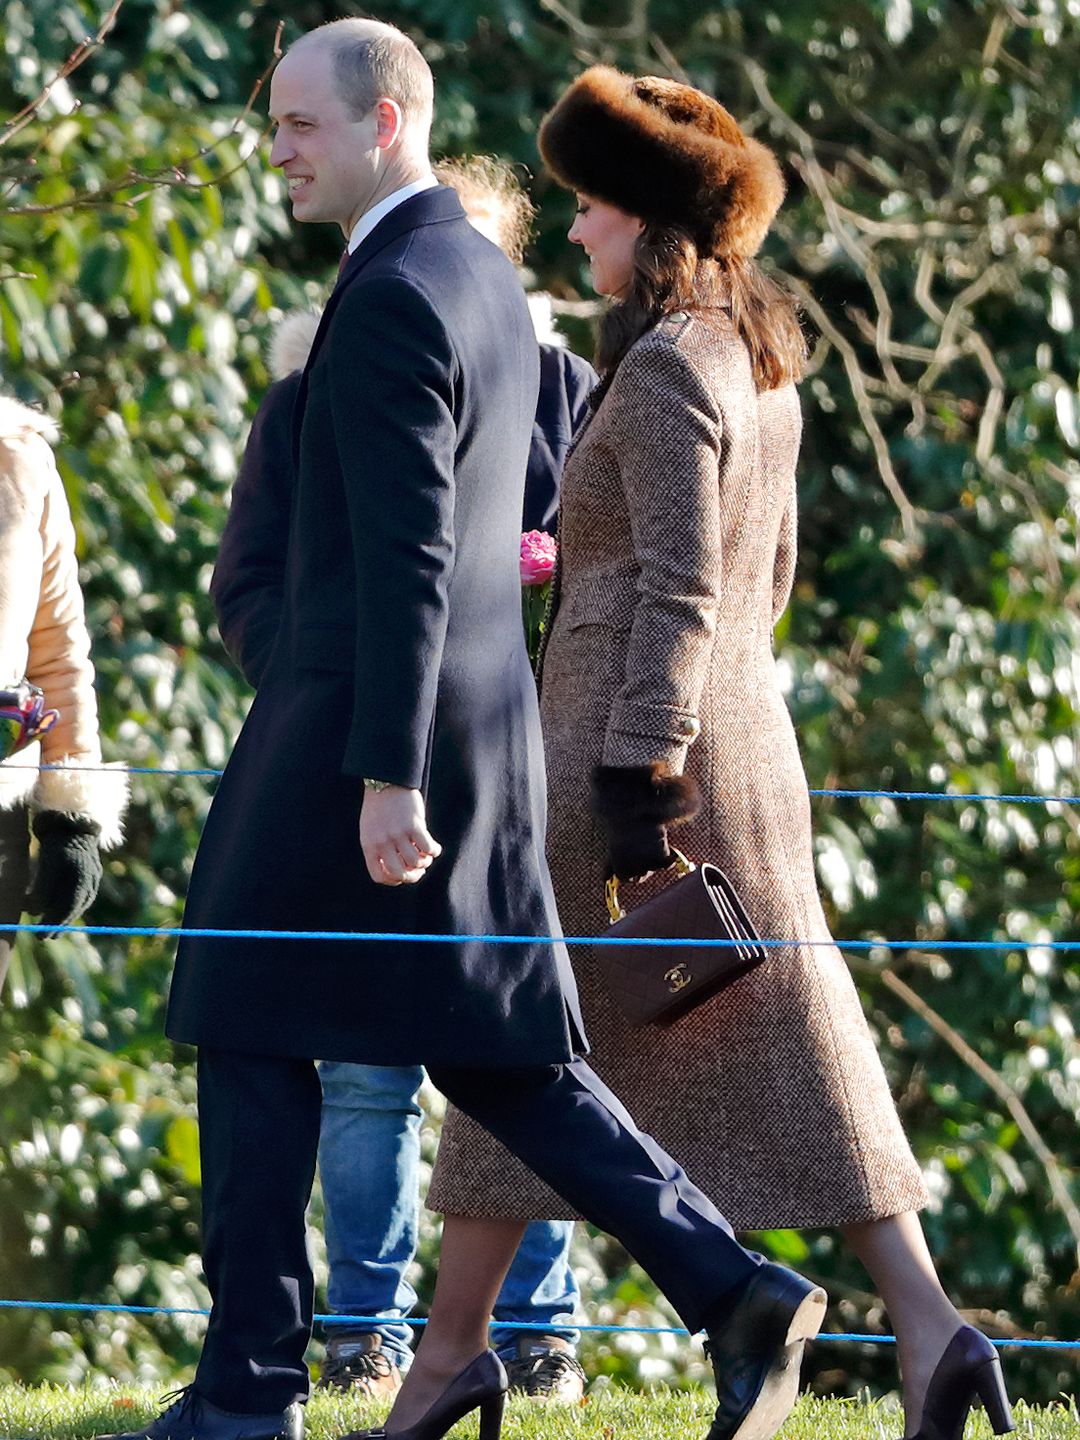 The royal couple attended Sunday service at St Mary Magdalene Church